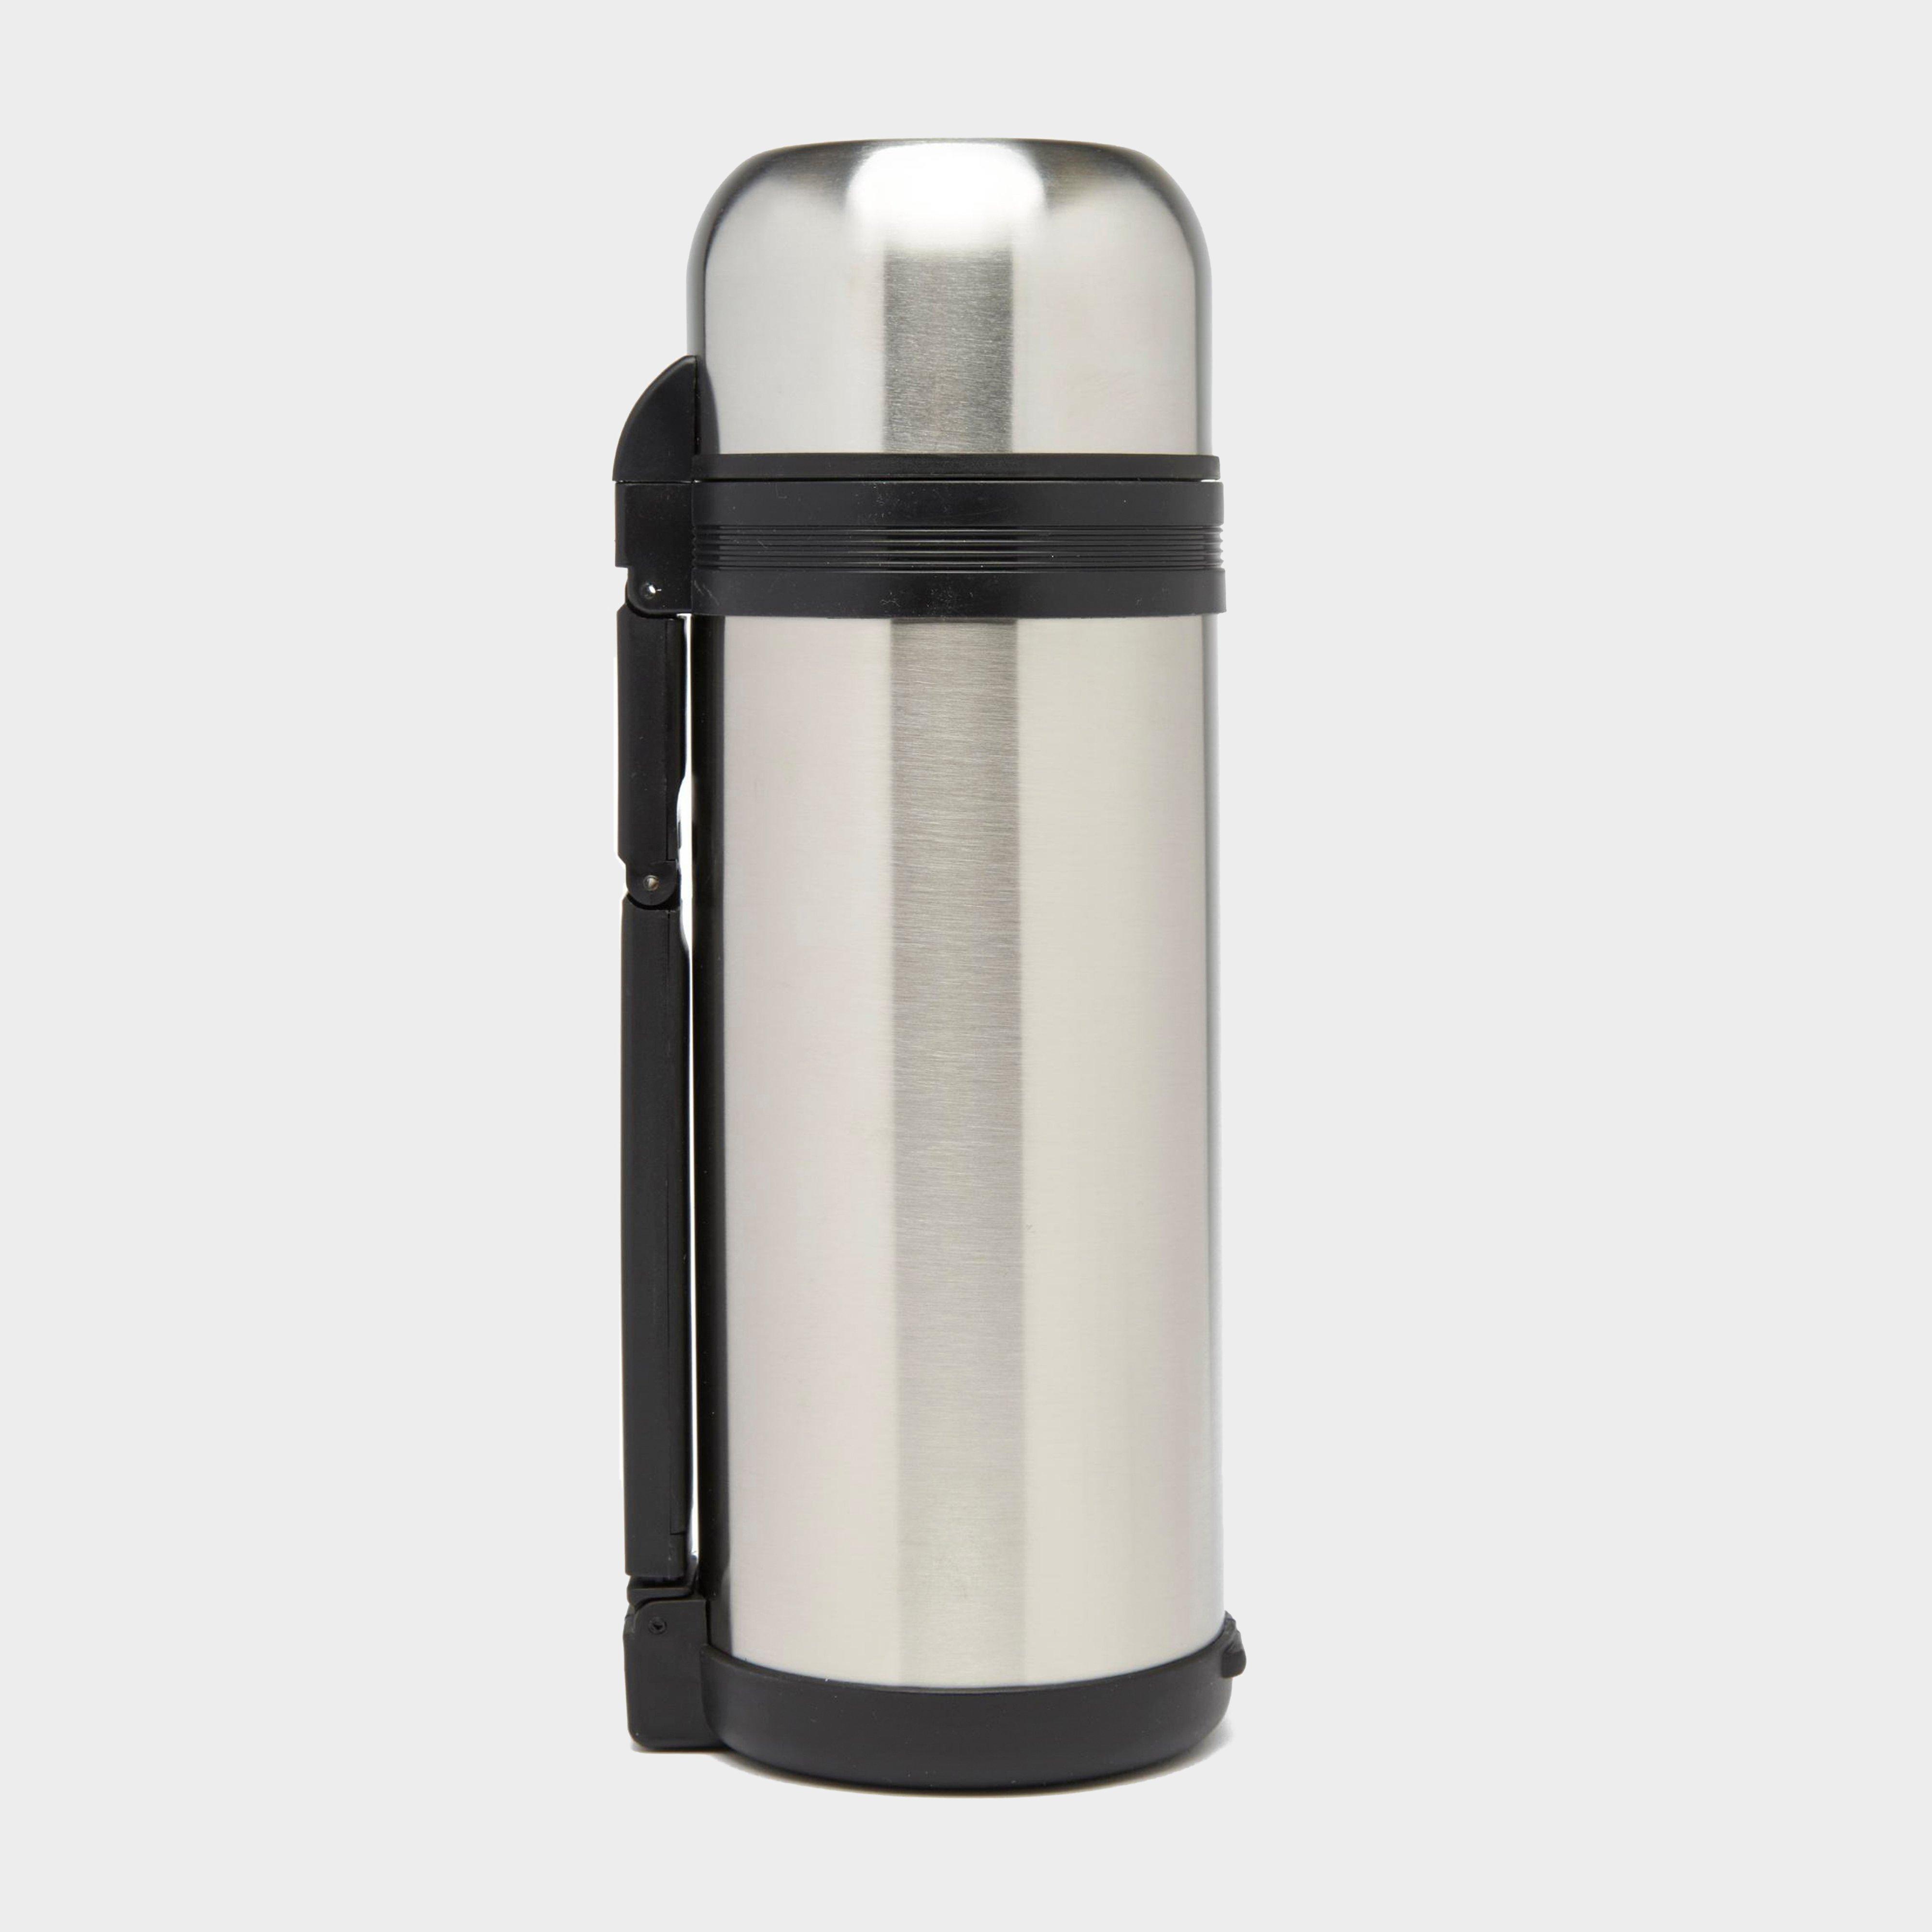 Eurohike Stainless Steel Flask 1.5L Review